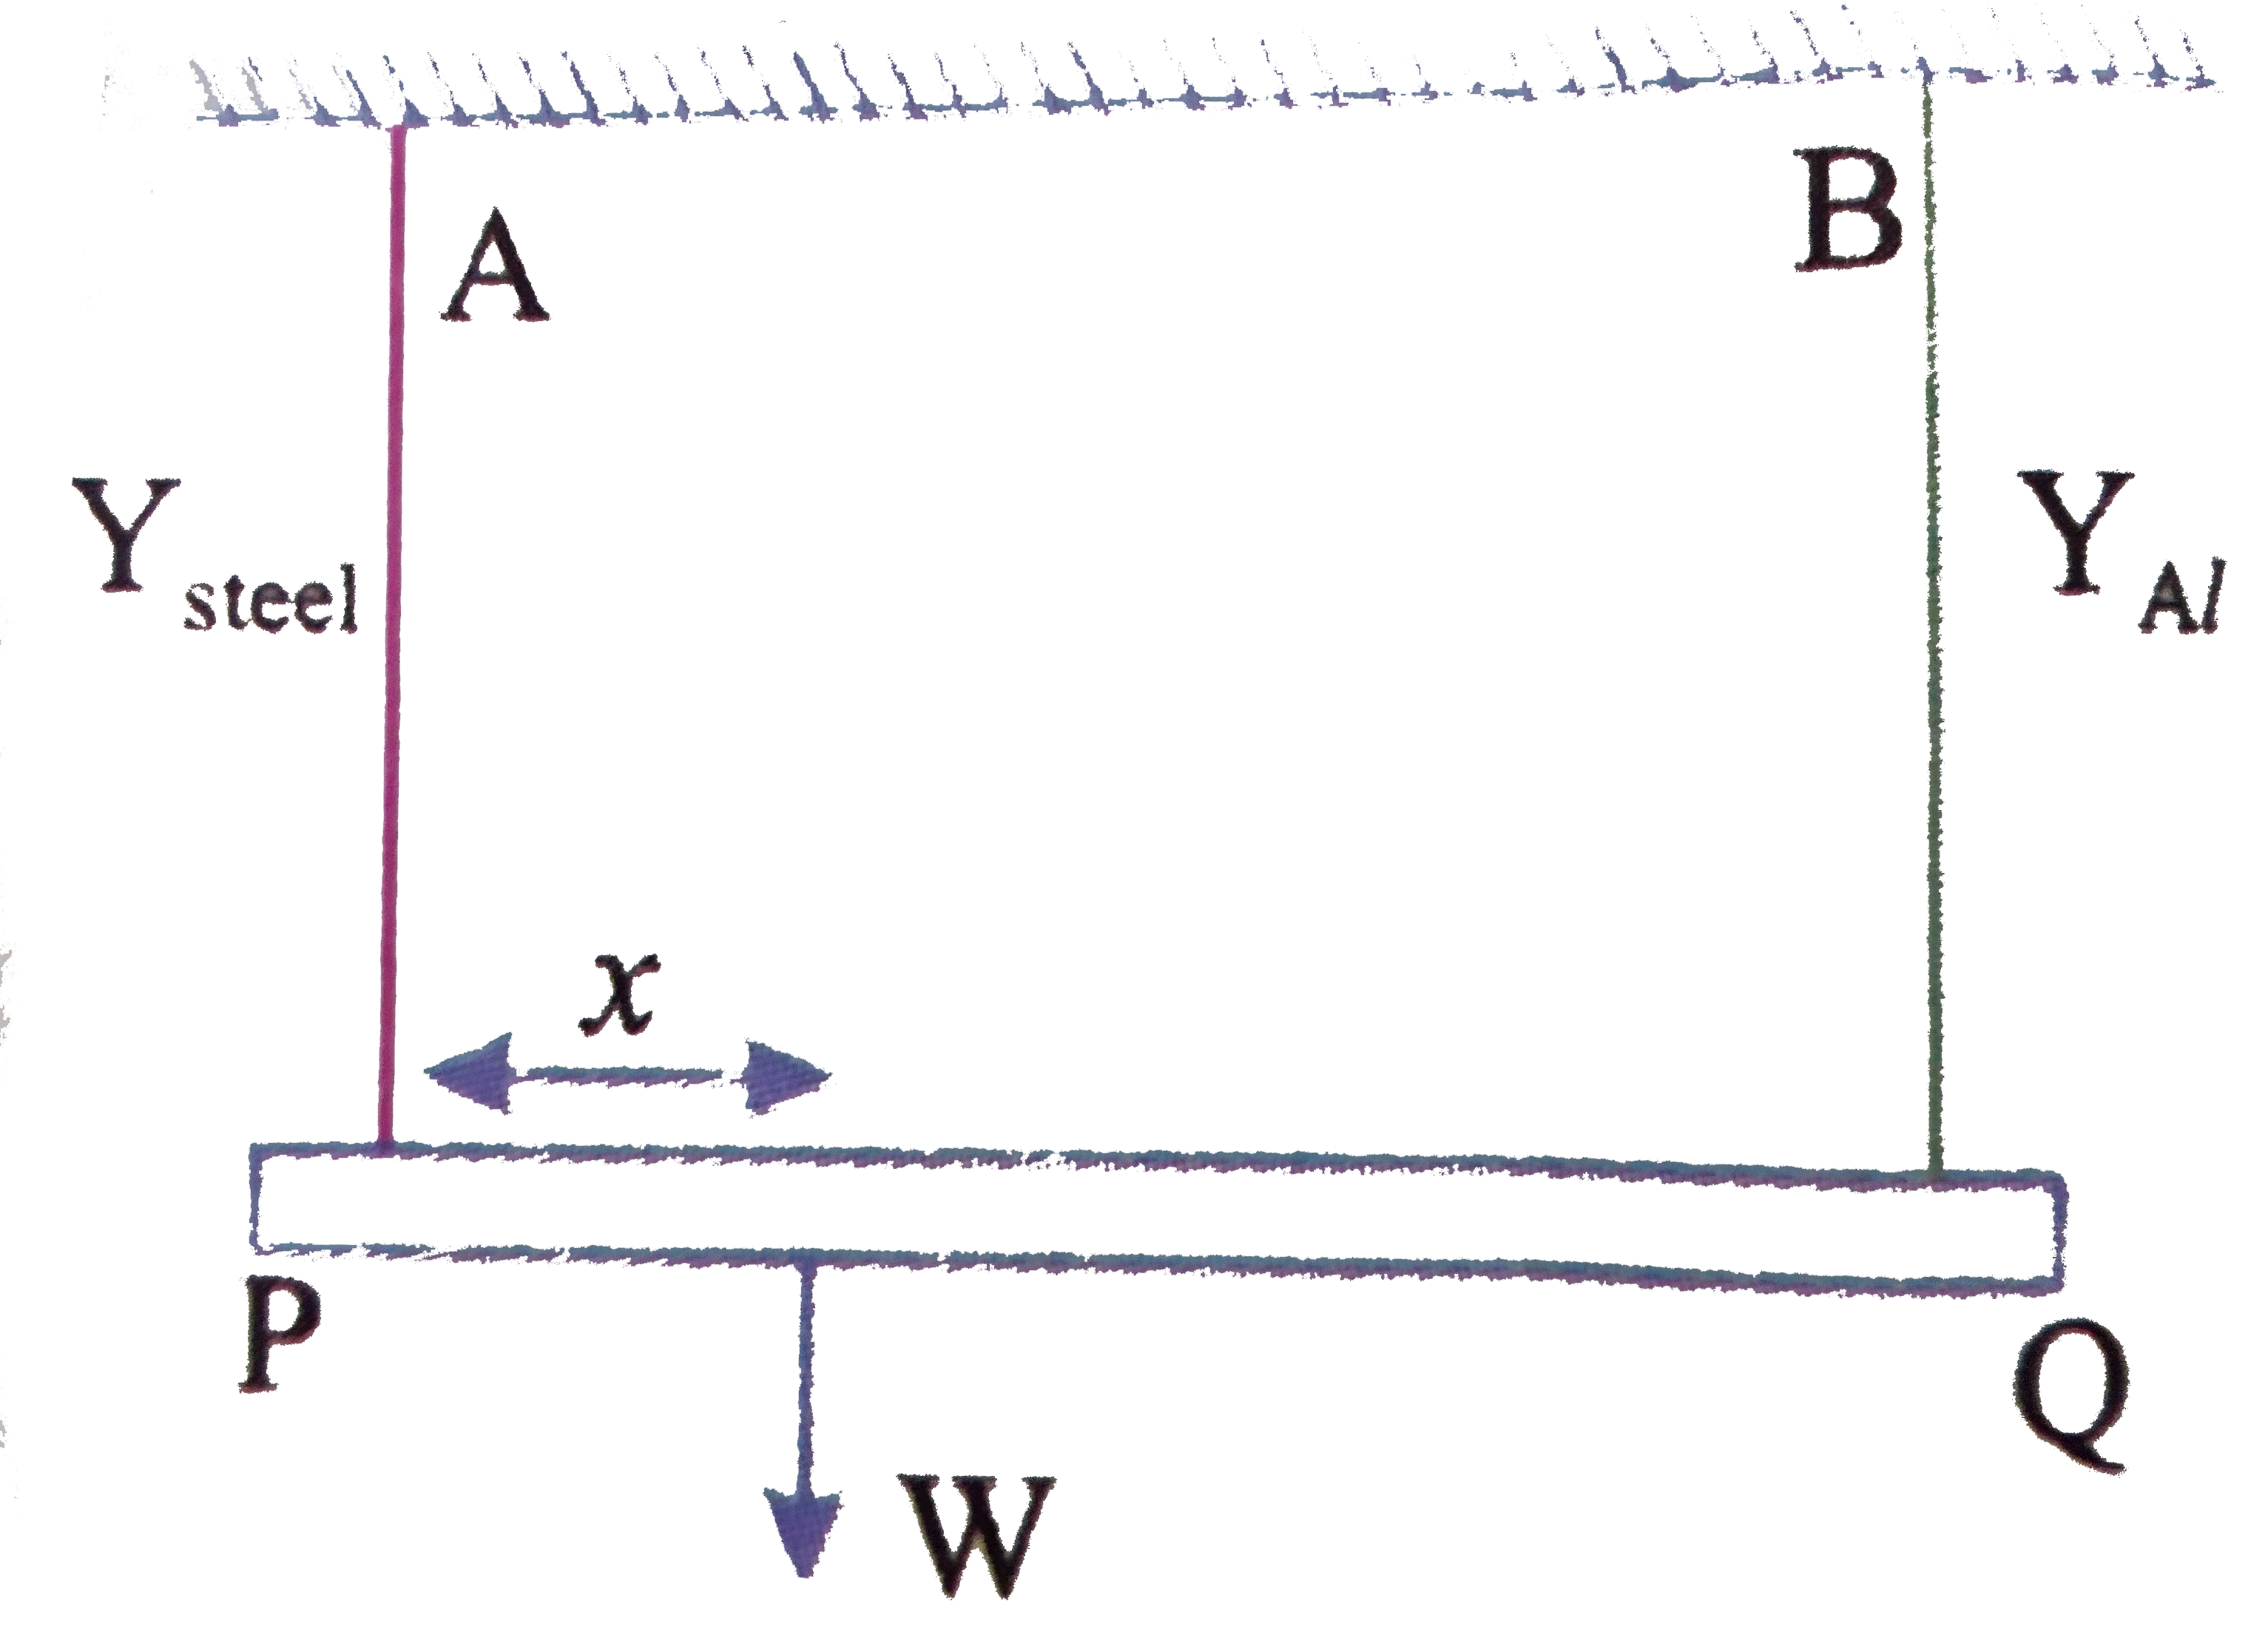 A rod  PQ of length 1.05m having negligible mass is supported at its ends by two wires one of stell (wire A), and the other of aluminium (wire B) of equal lengths as shown in fig. The cross-sectional areas of wires A and B are 1.0mm^(2) and 2.0mm^(2) respectively. At what point along the rod a load W be  suspended  in order to produce   (a) equal stress, (b) equal strains in both steel an aluminium.   (Y(